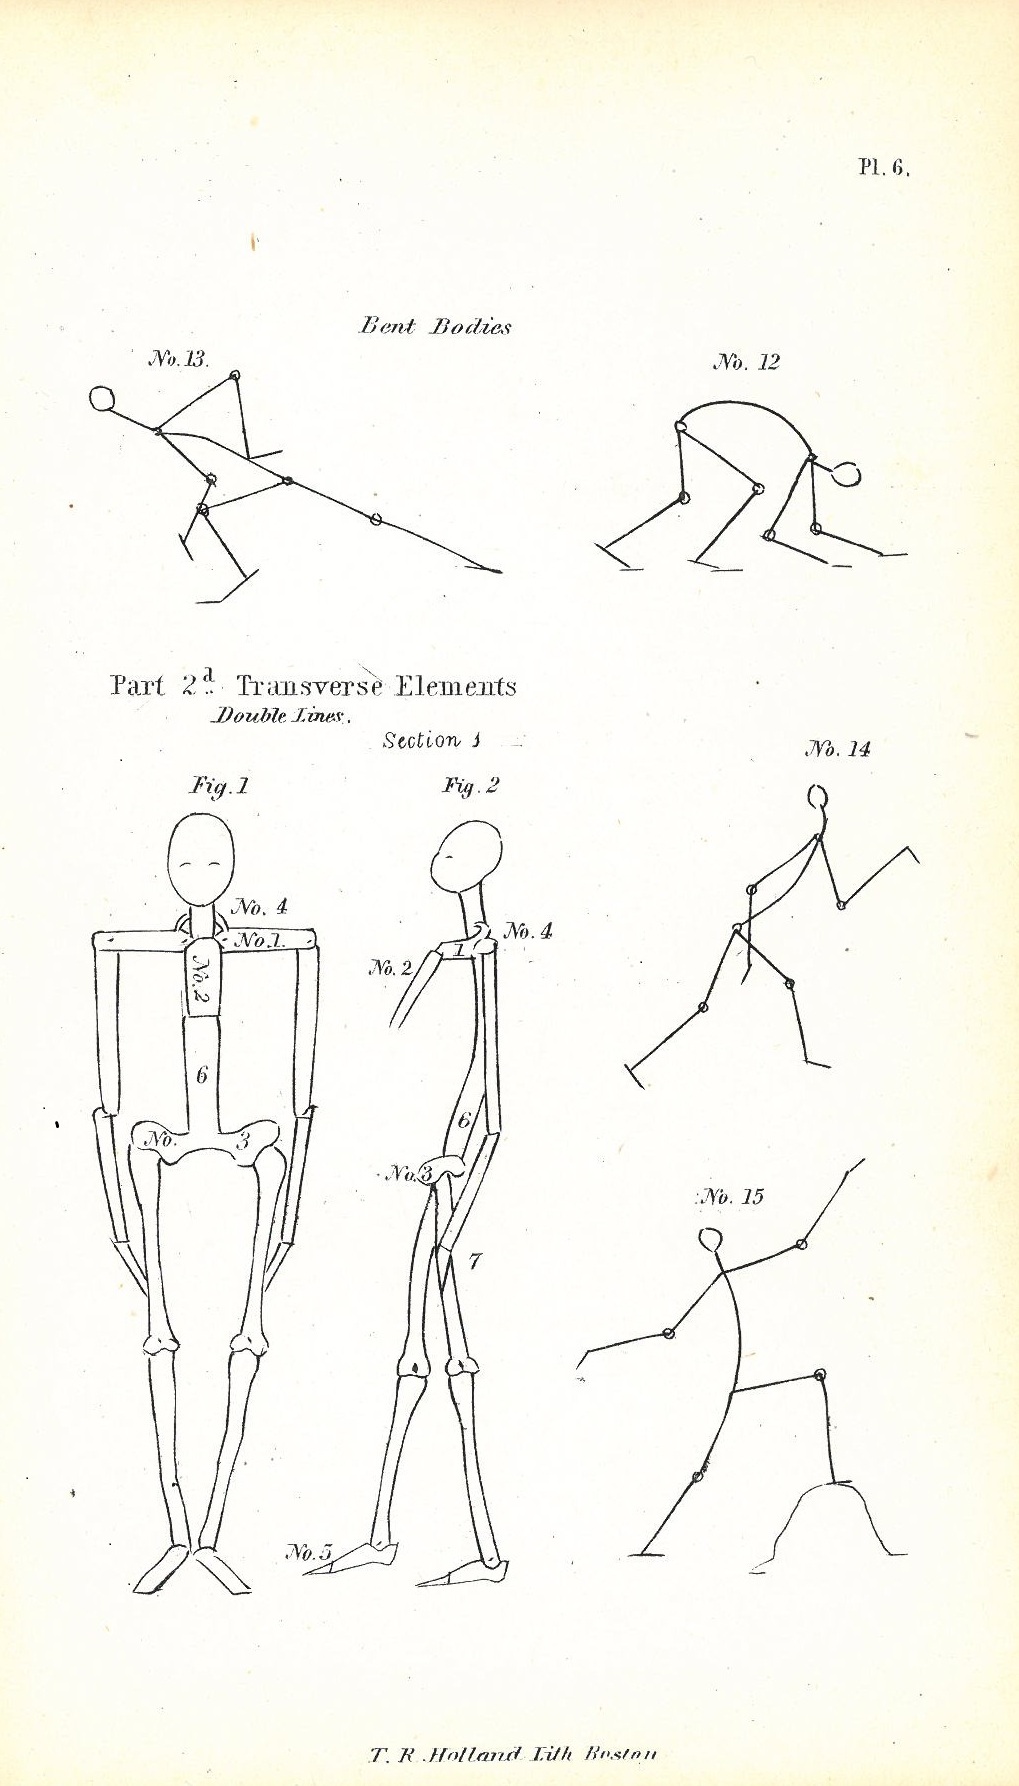  A page from William Rimmer’s drawing book, published 1864